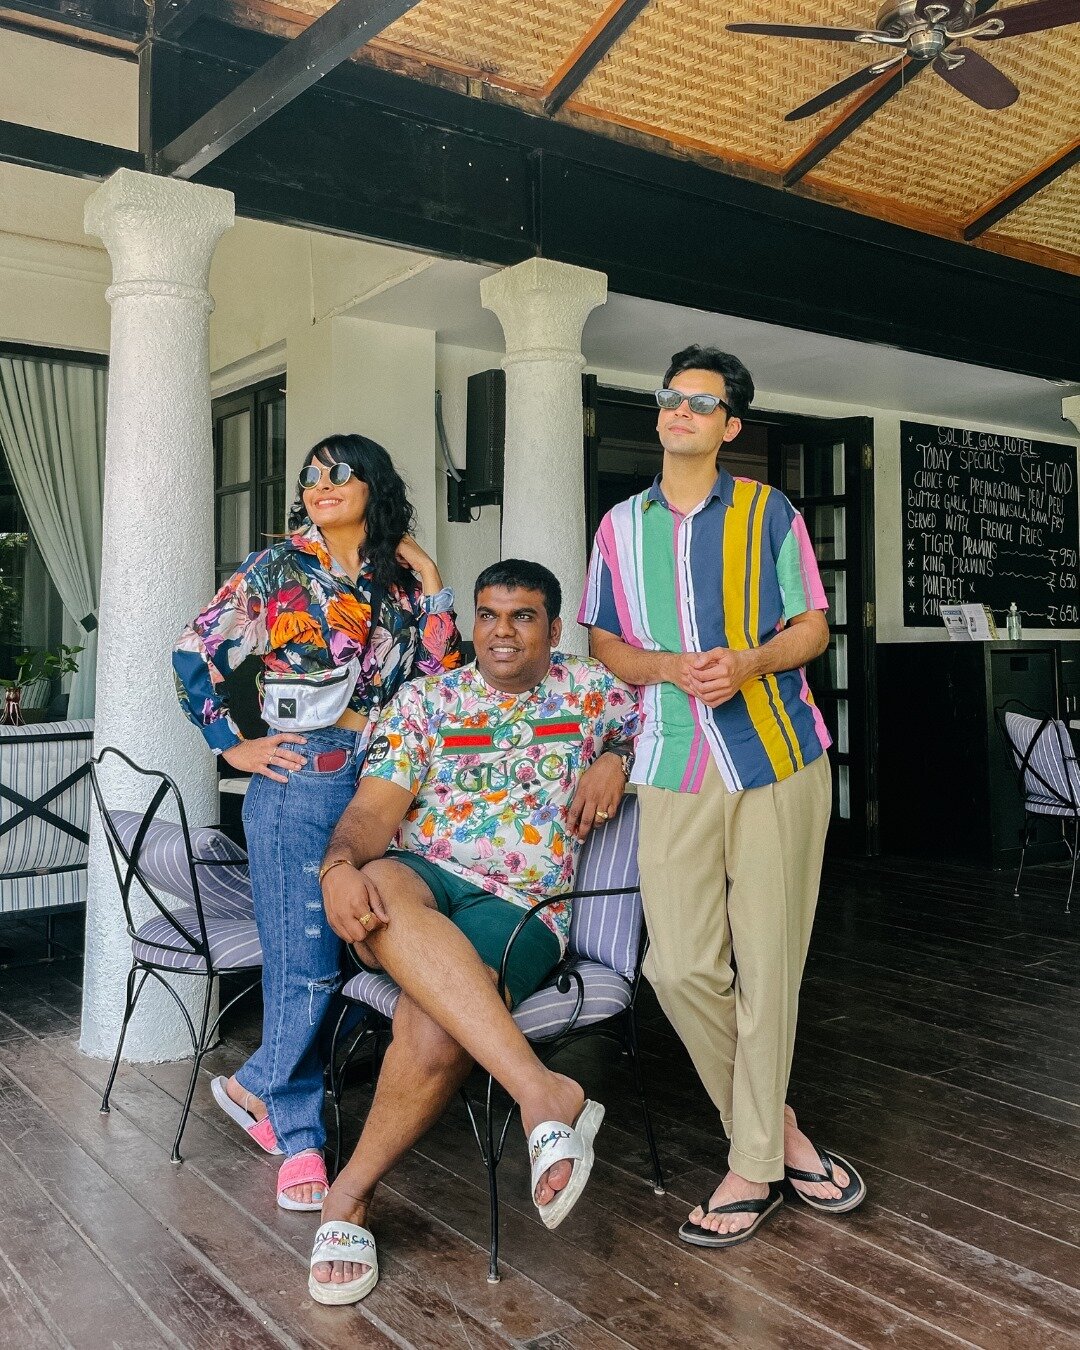 Sanjay and his colourful squad reminding us that, once you find your tribe keep them close, and make sure to find opportunities to wear matching clothes and flaunt it! 🌴 ⠀⠀⠀⠀⠀⠀⠀⠀⠀
#goa #bhxproject